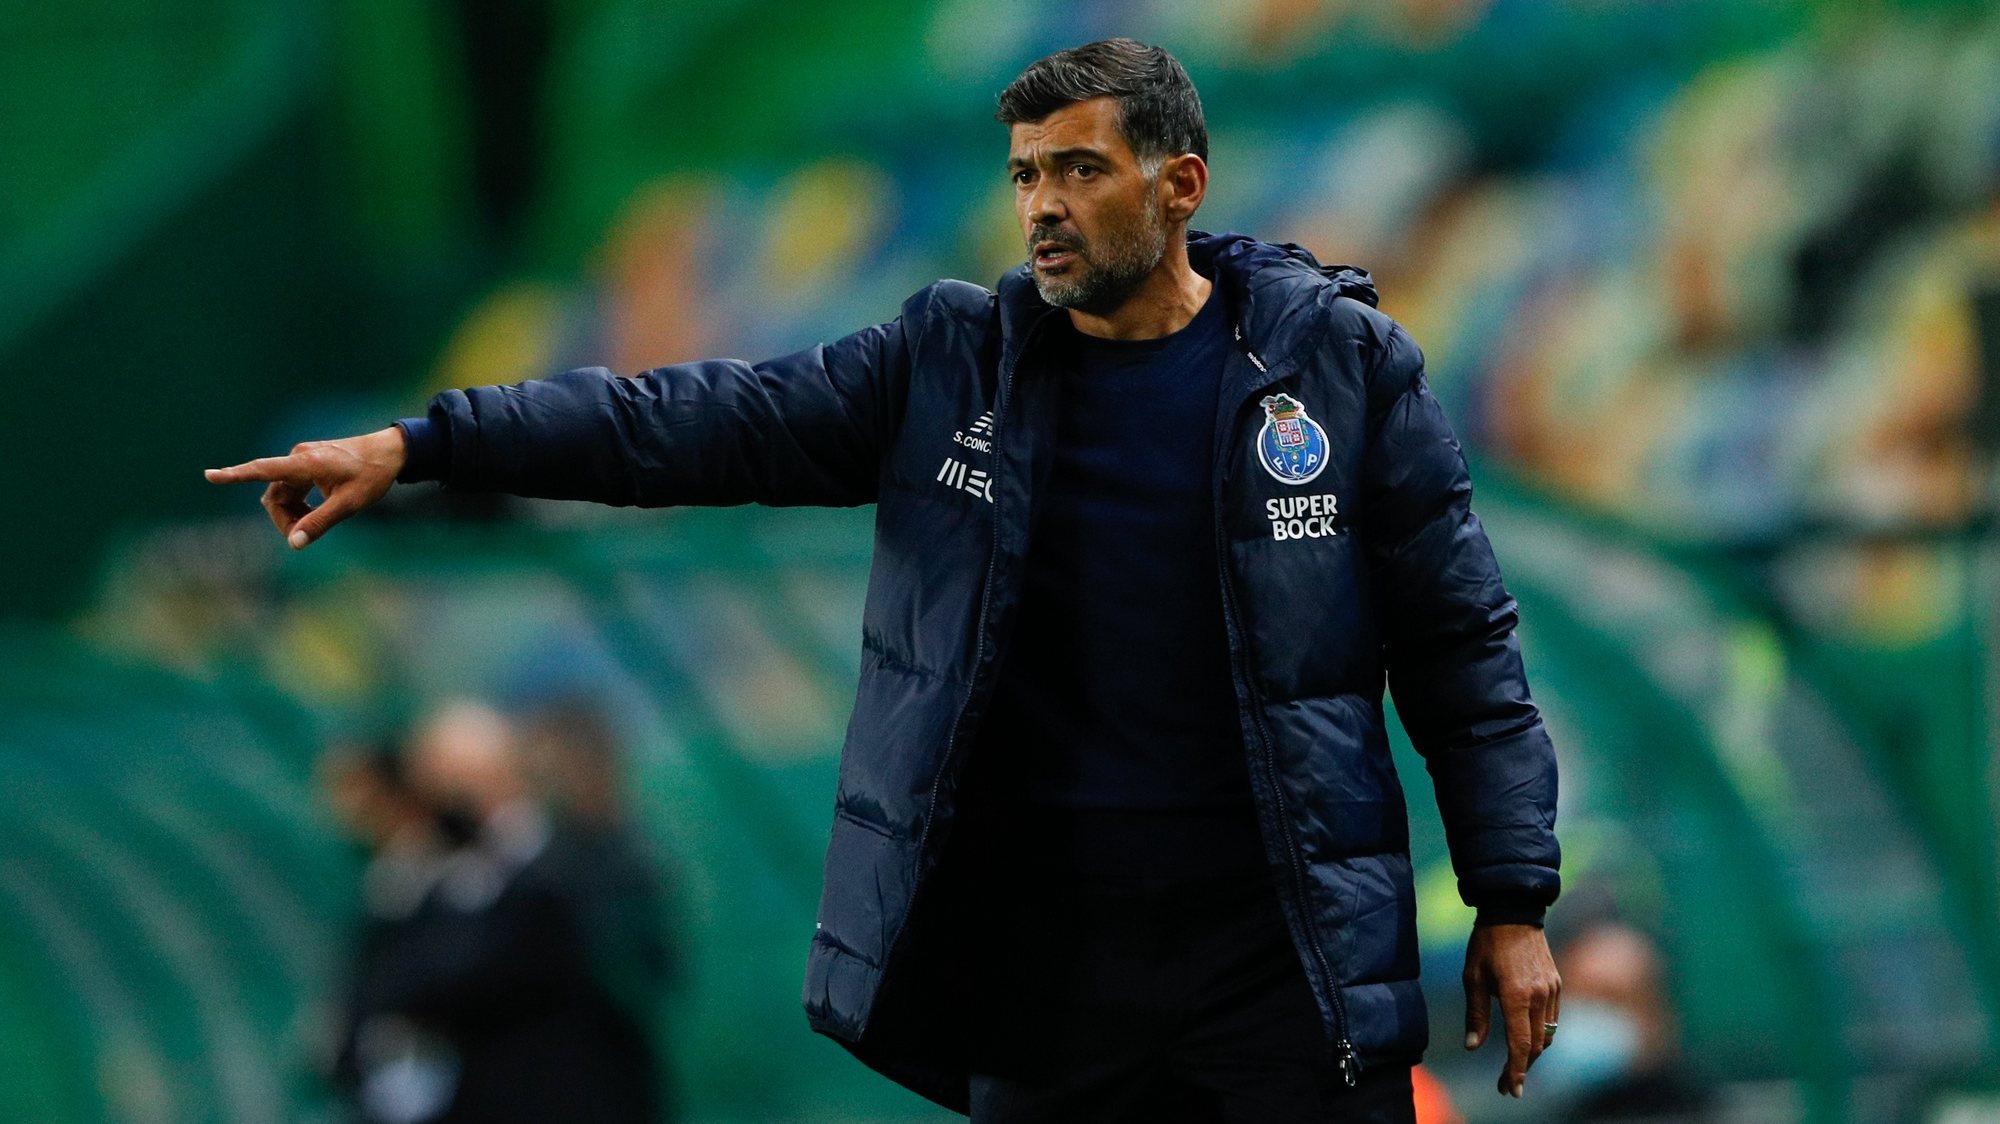 FC Porto&#039;s head coach Sergio Conceicao reacts during the Portuguese First League match against Sporting held at Alvalade Stadium in Lisbon, Portugal, 17 October 2020. ANTONIO COTRIM/LUSA